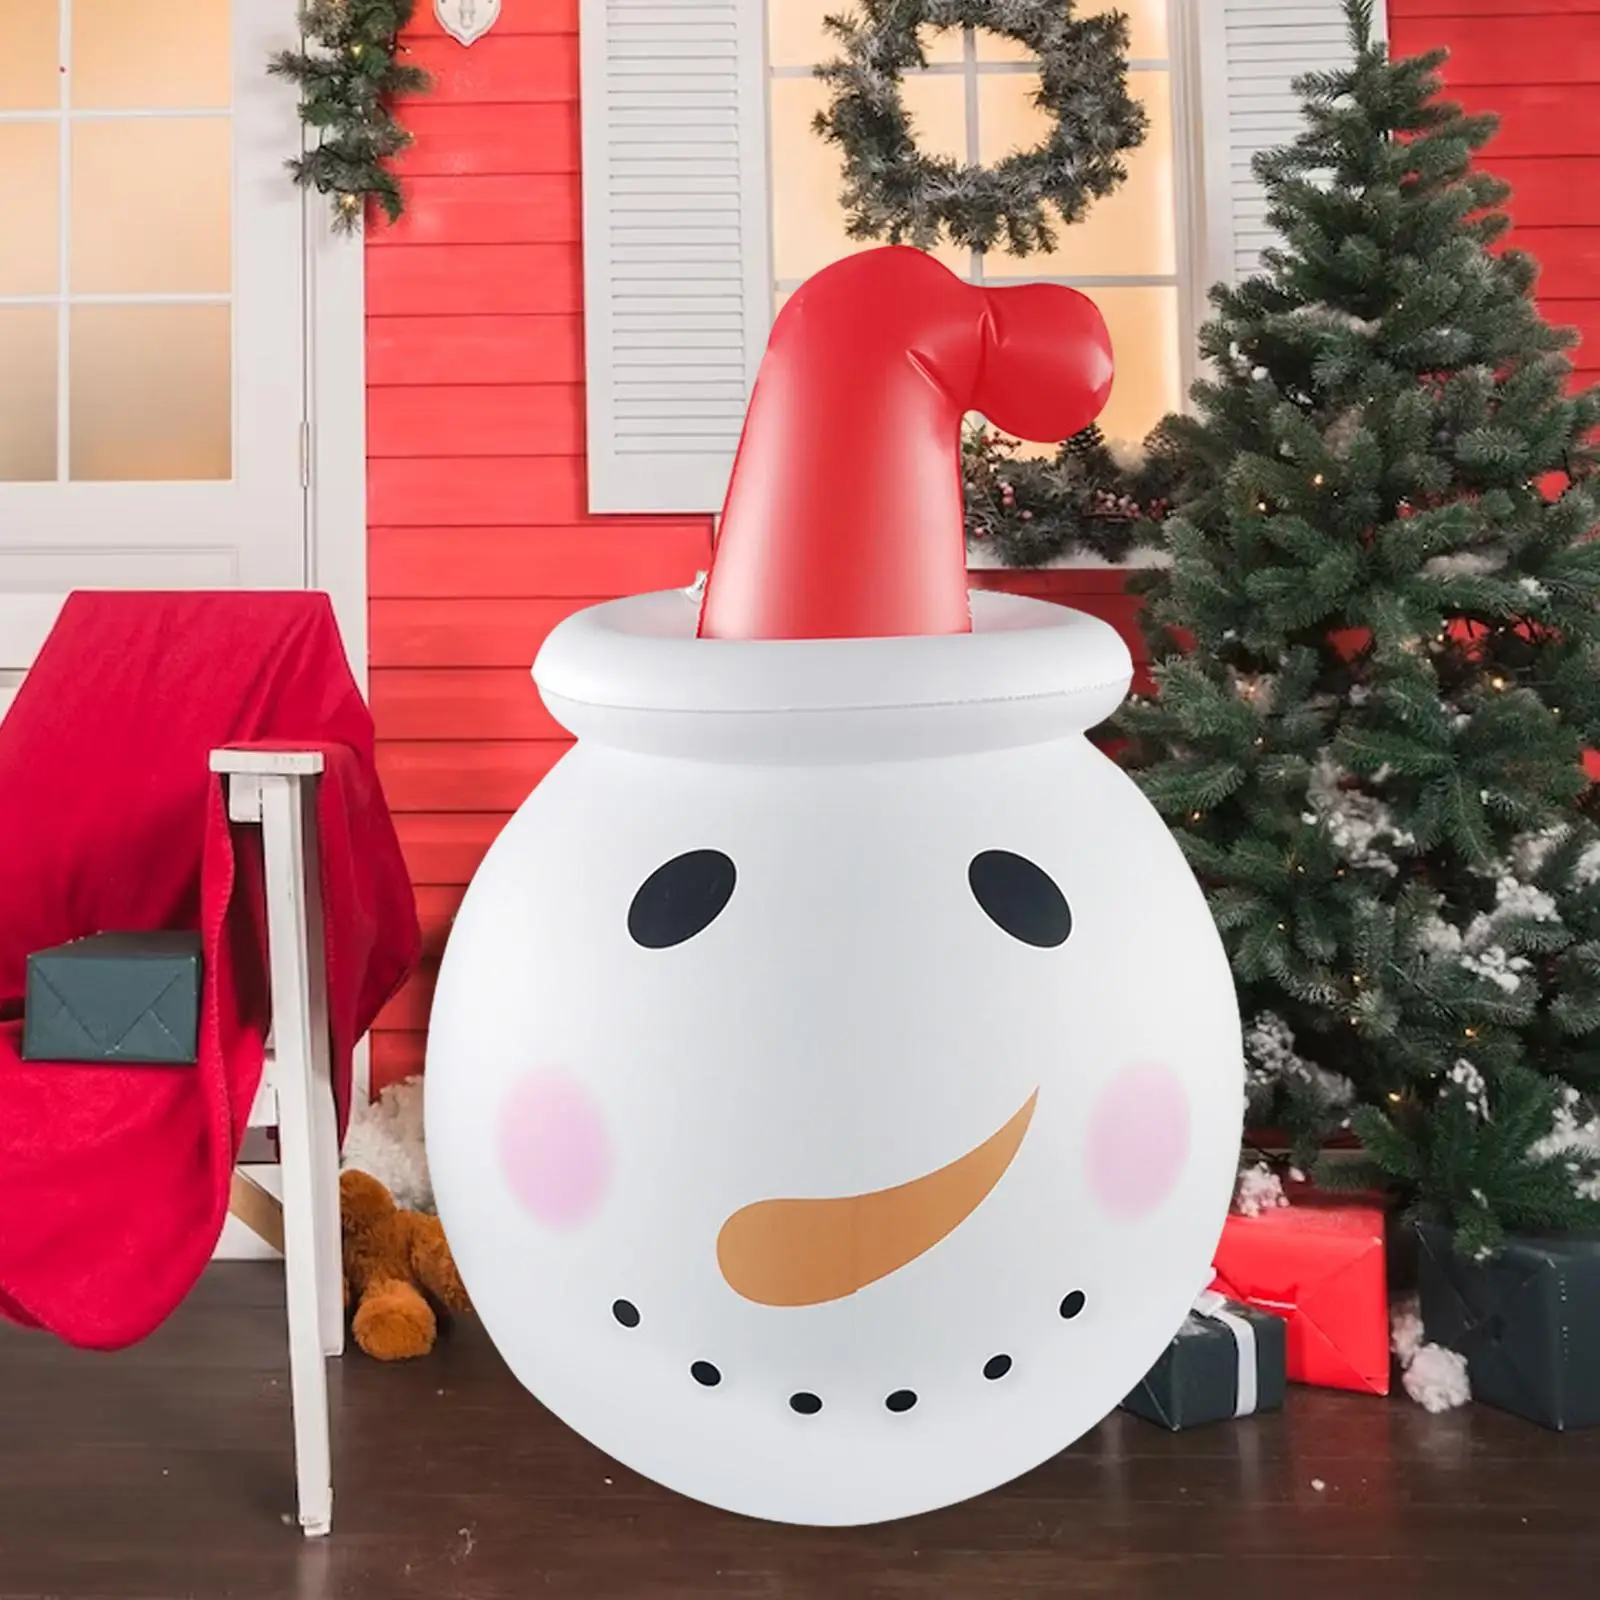 Christmas Inflatable Snowman Ornament LED Lights Artwork Xmas Snowball Decor with Light for Office Halloween Home Apartment Lawn